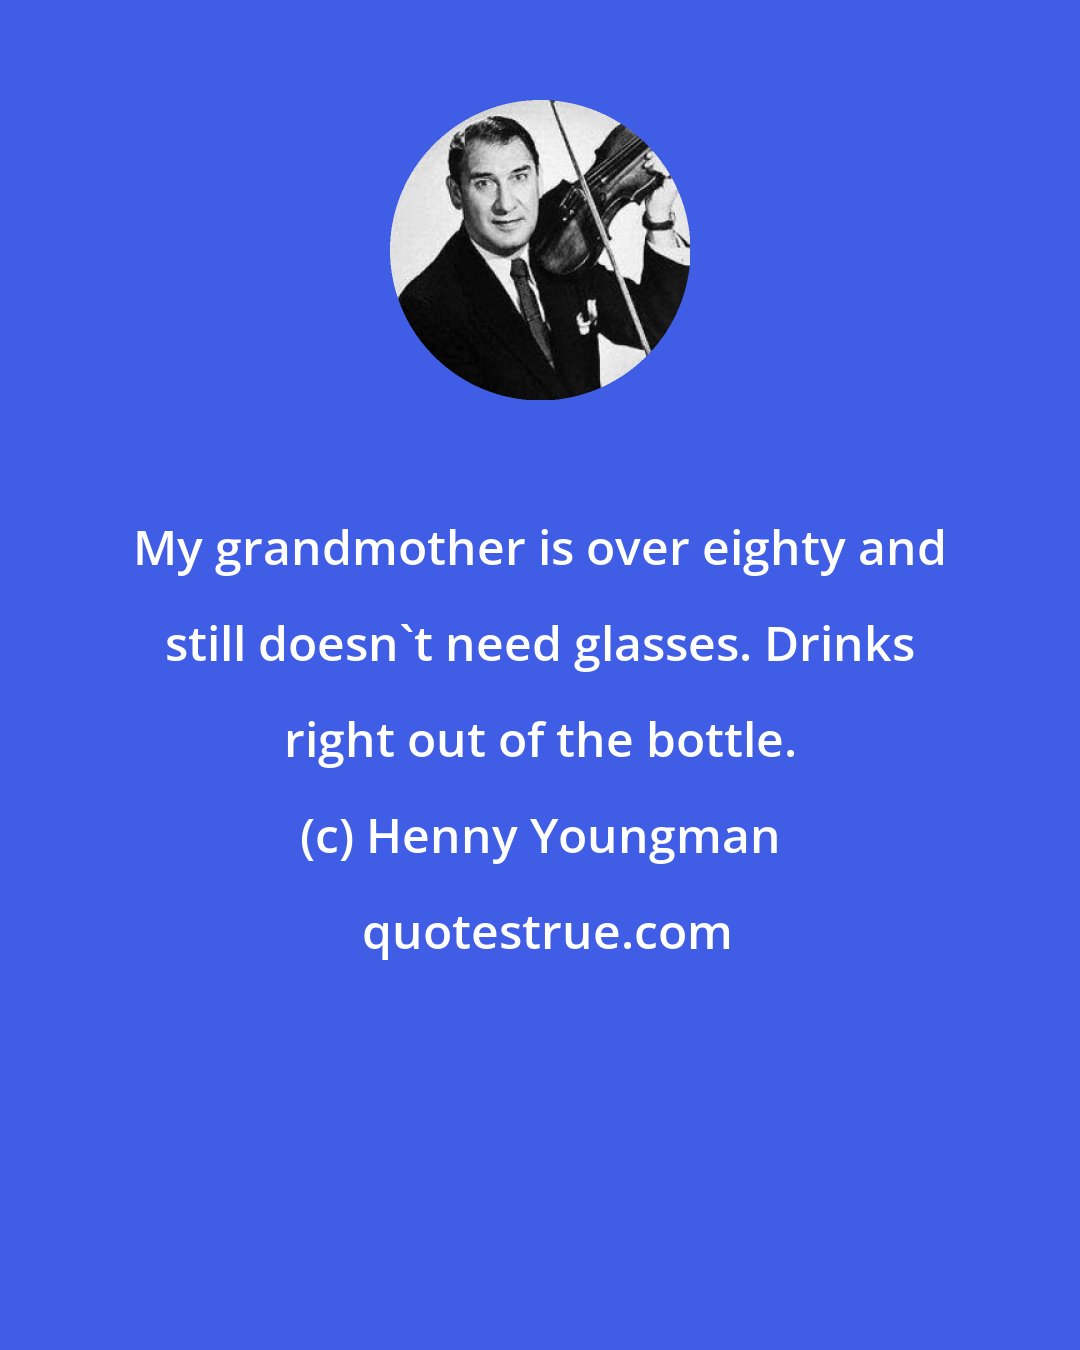 Henny Youngman: My grandmother is over eighty and still doesn't need glasses. Drinks right out of the bottle.